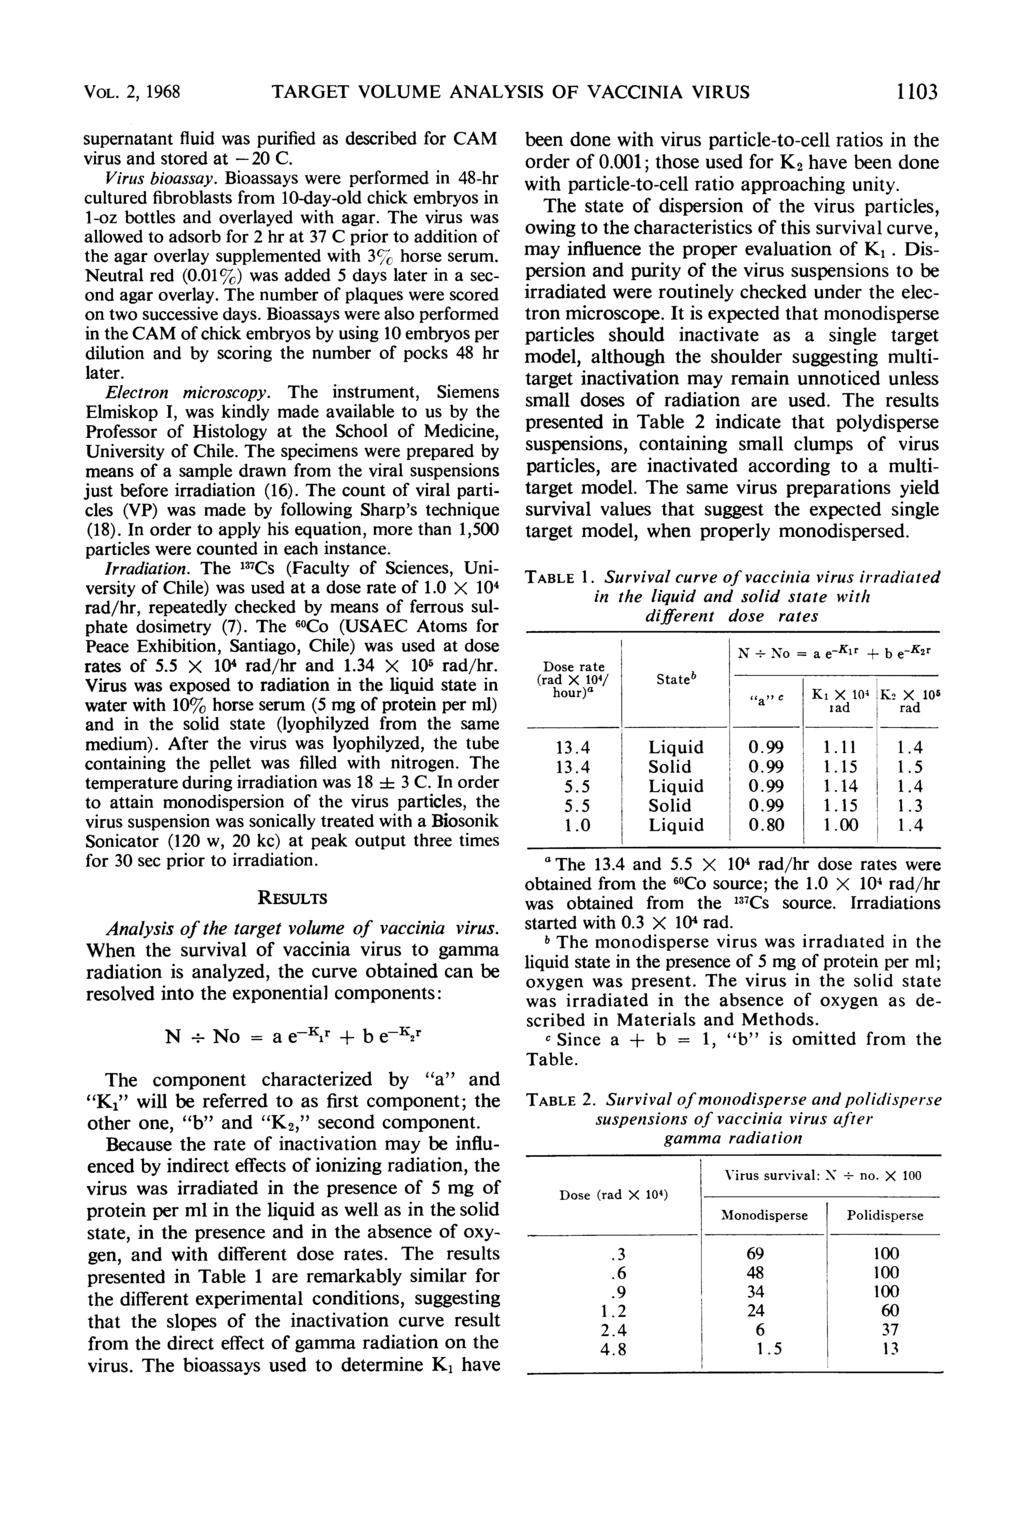 VOL. 2, 1968 TARGET VOLUME ANALYSIS OF VACCINIA VIRUS 1 103 supernatant fluid was purified as described for CAM virus and stored at -20 C. Virus bioassay.